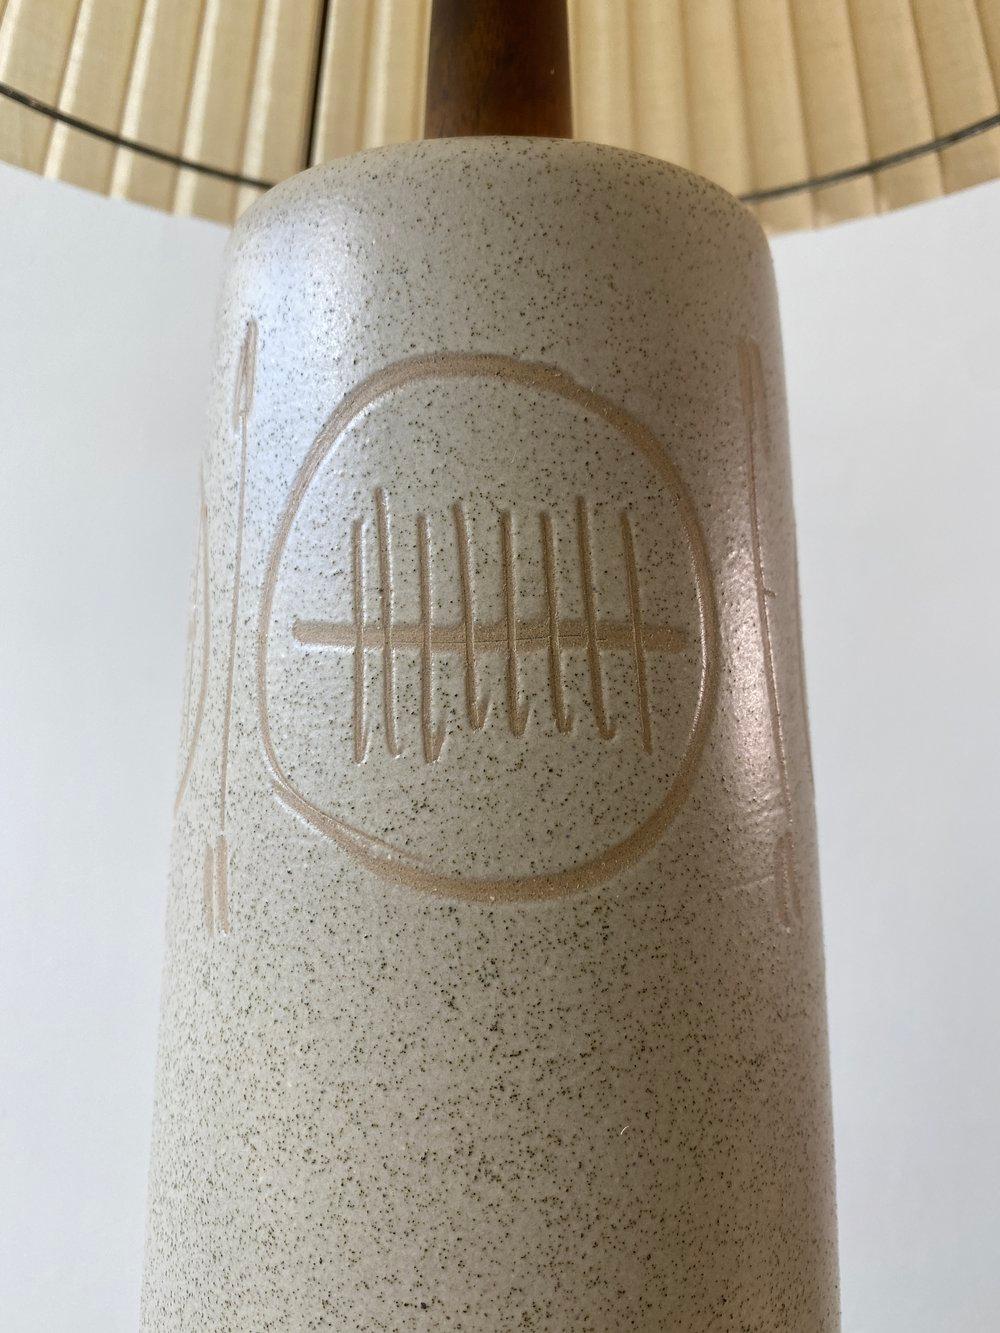 Vintage Jane + Gordon Martz Marshall Studios Incised Stoneware Lamp 141-35-122 In Good Condition For Sale In Long Island City, NY